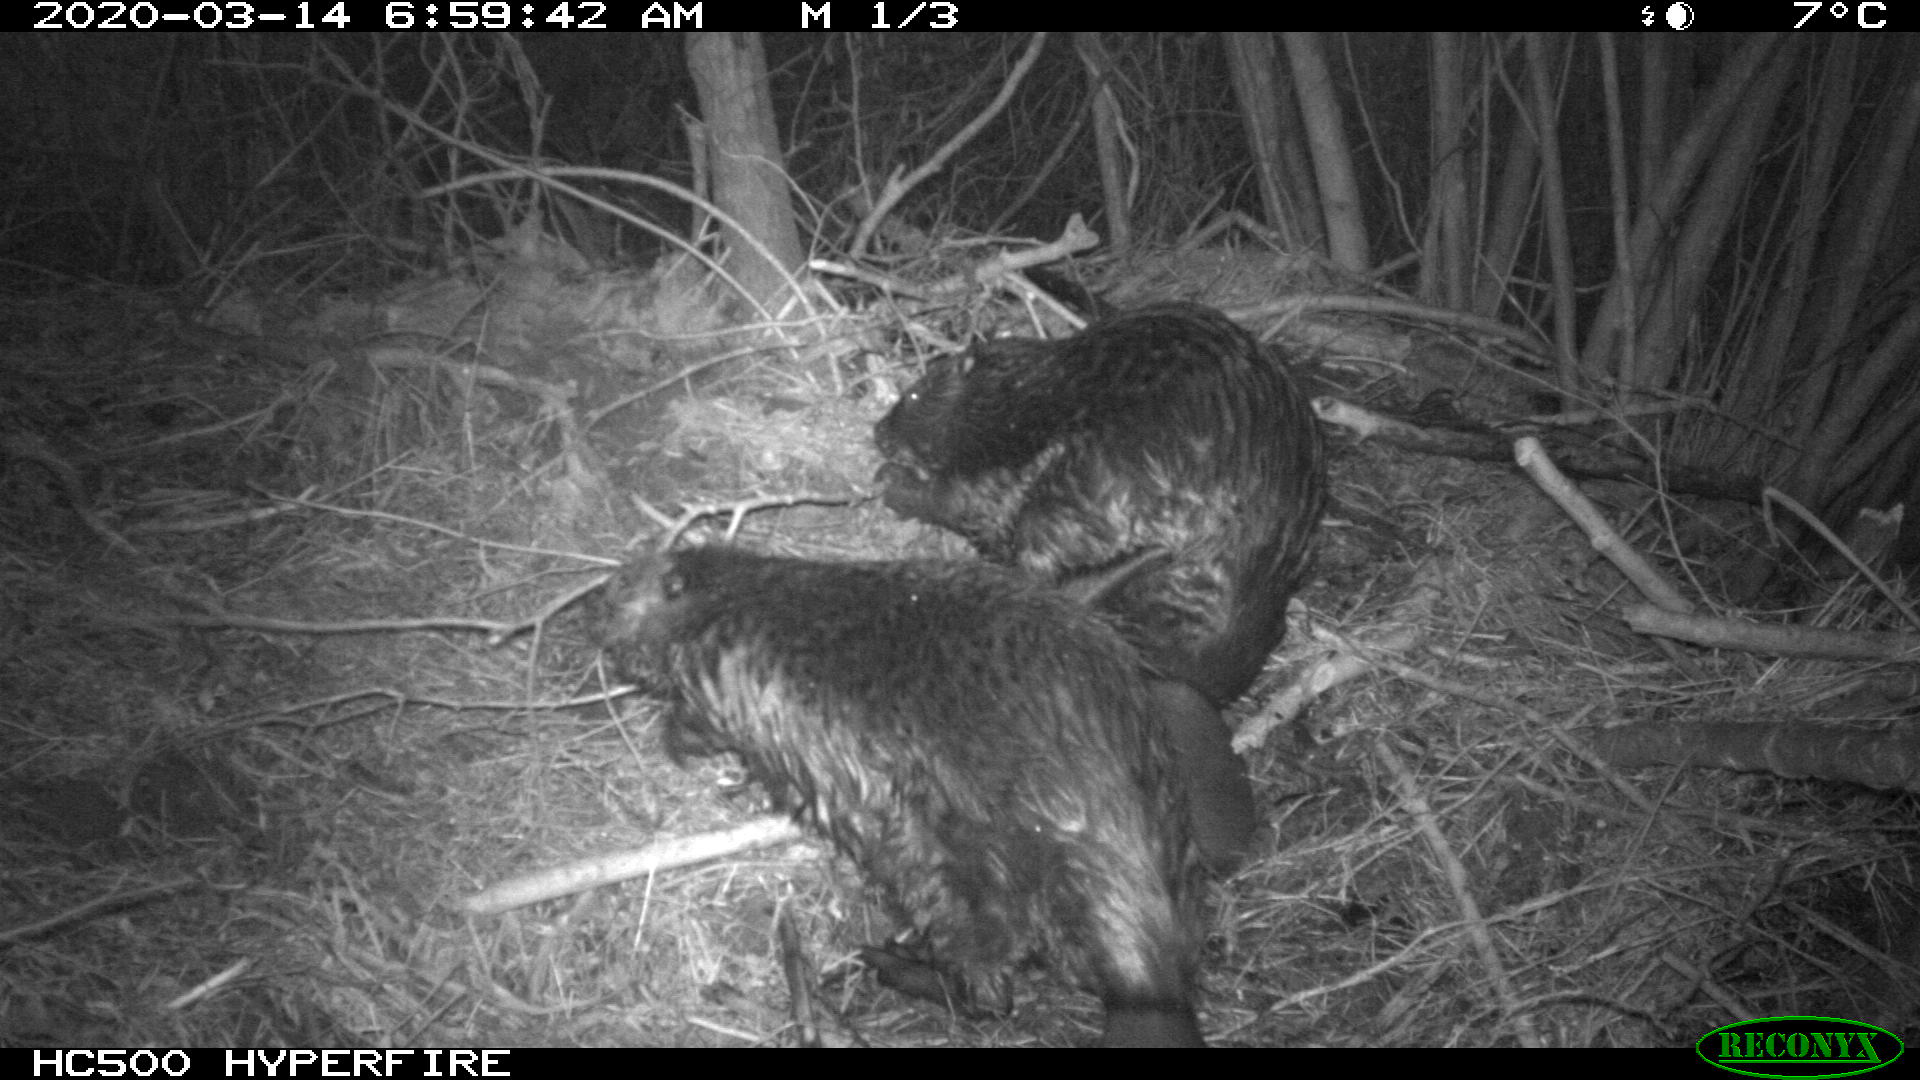 ONLINE Beavers:  Challenges and Benefits to Coexistence